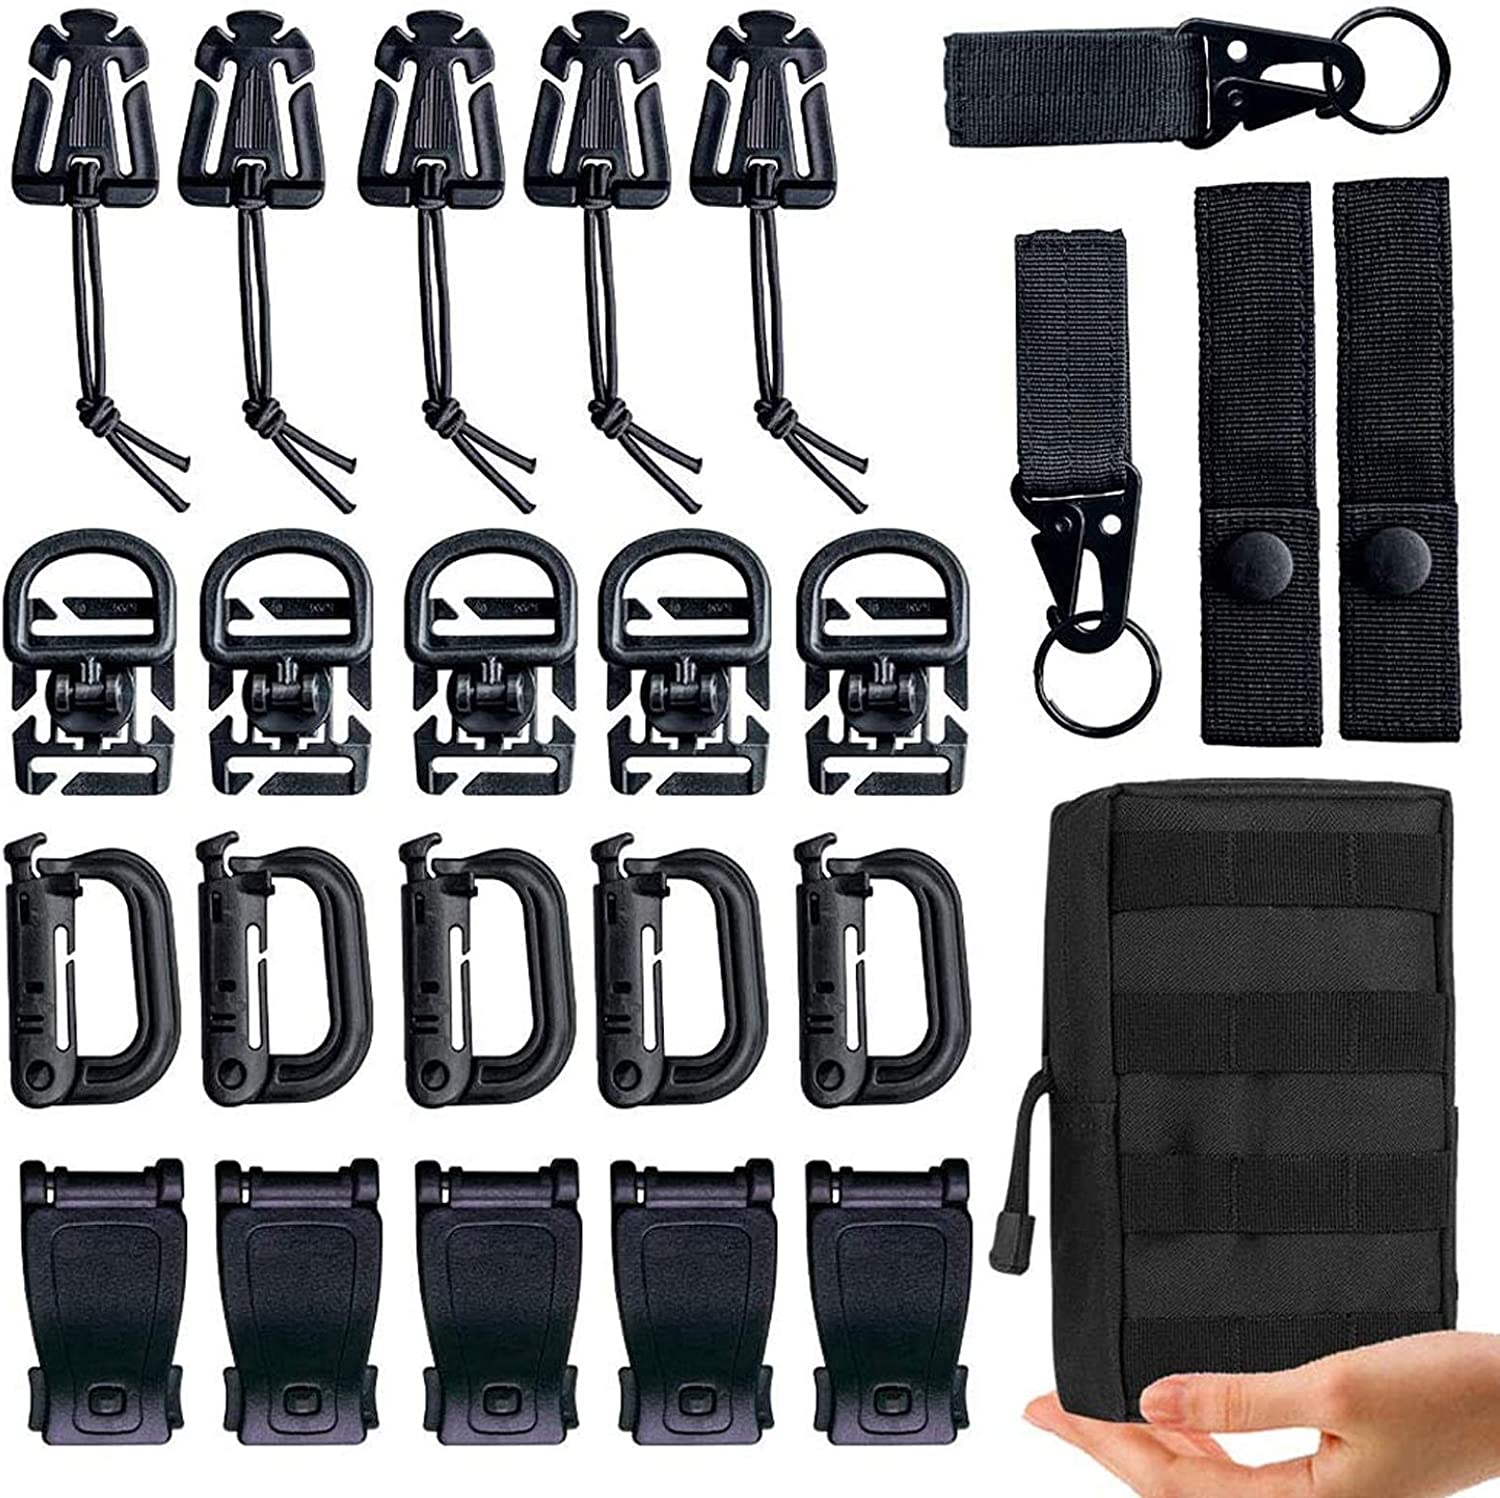 MWZTECH Kit of 25 Attachments for Molle Backpack, Molle Accessories Kit for 1“ Webbing Strap Tactical Backpack,D-Ring Grimloc Locking Gear Clip,Web Dominator Elastic Strings